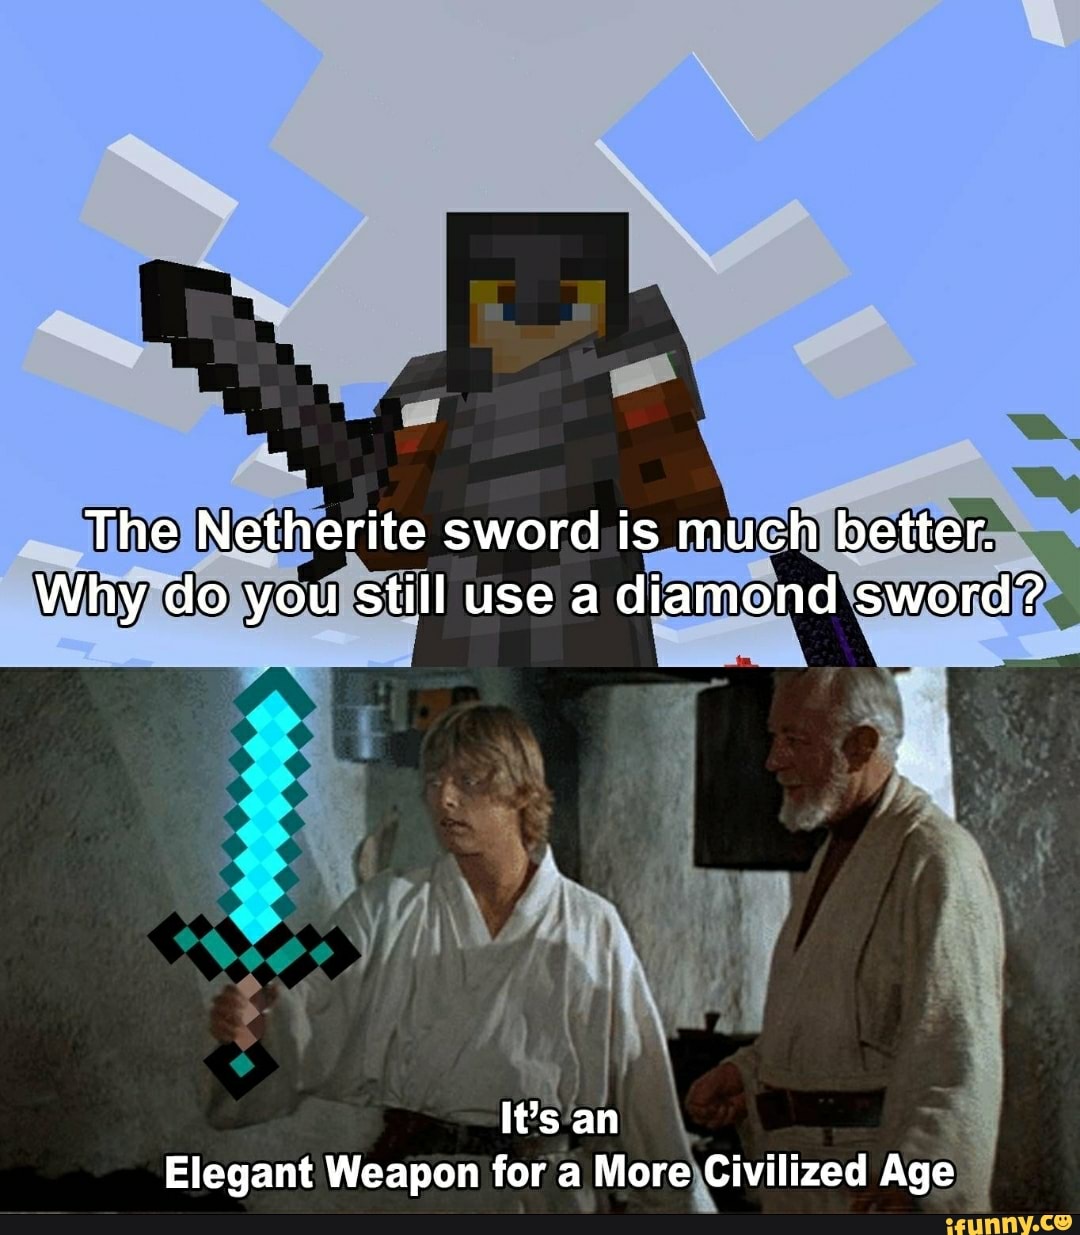 a weapon for a more civilized age